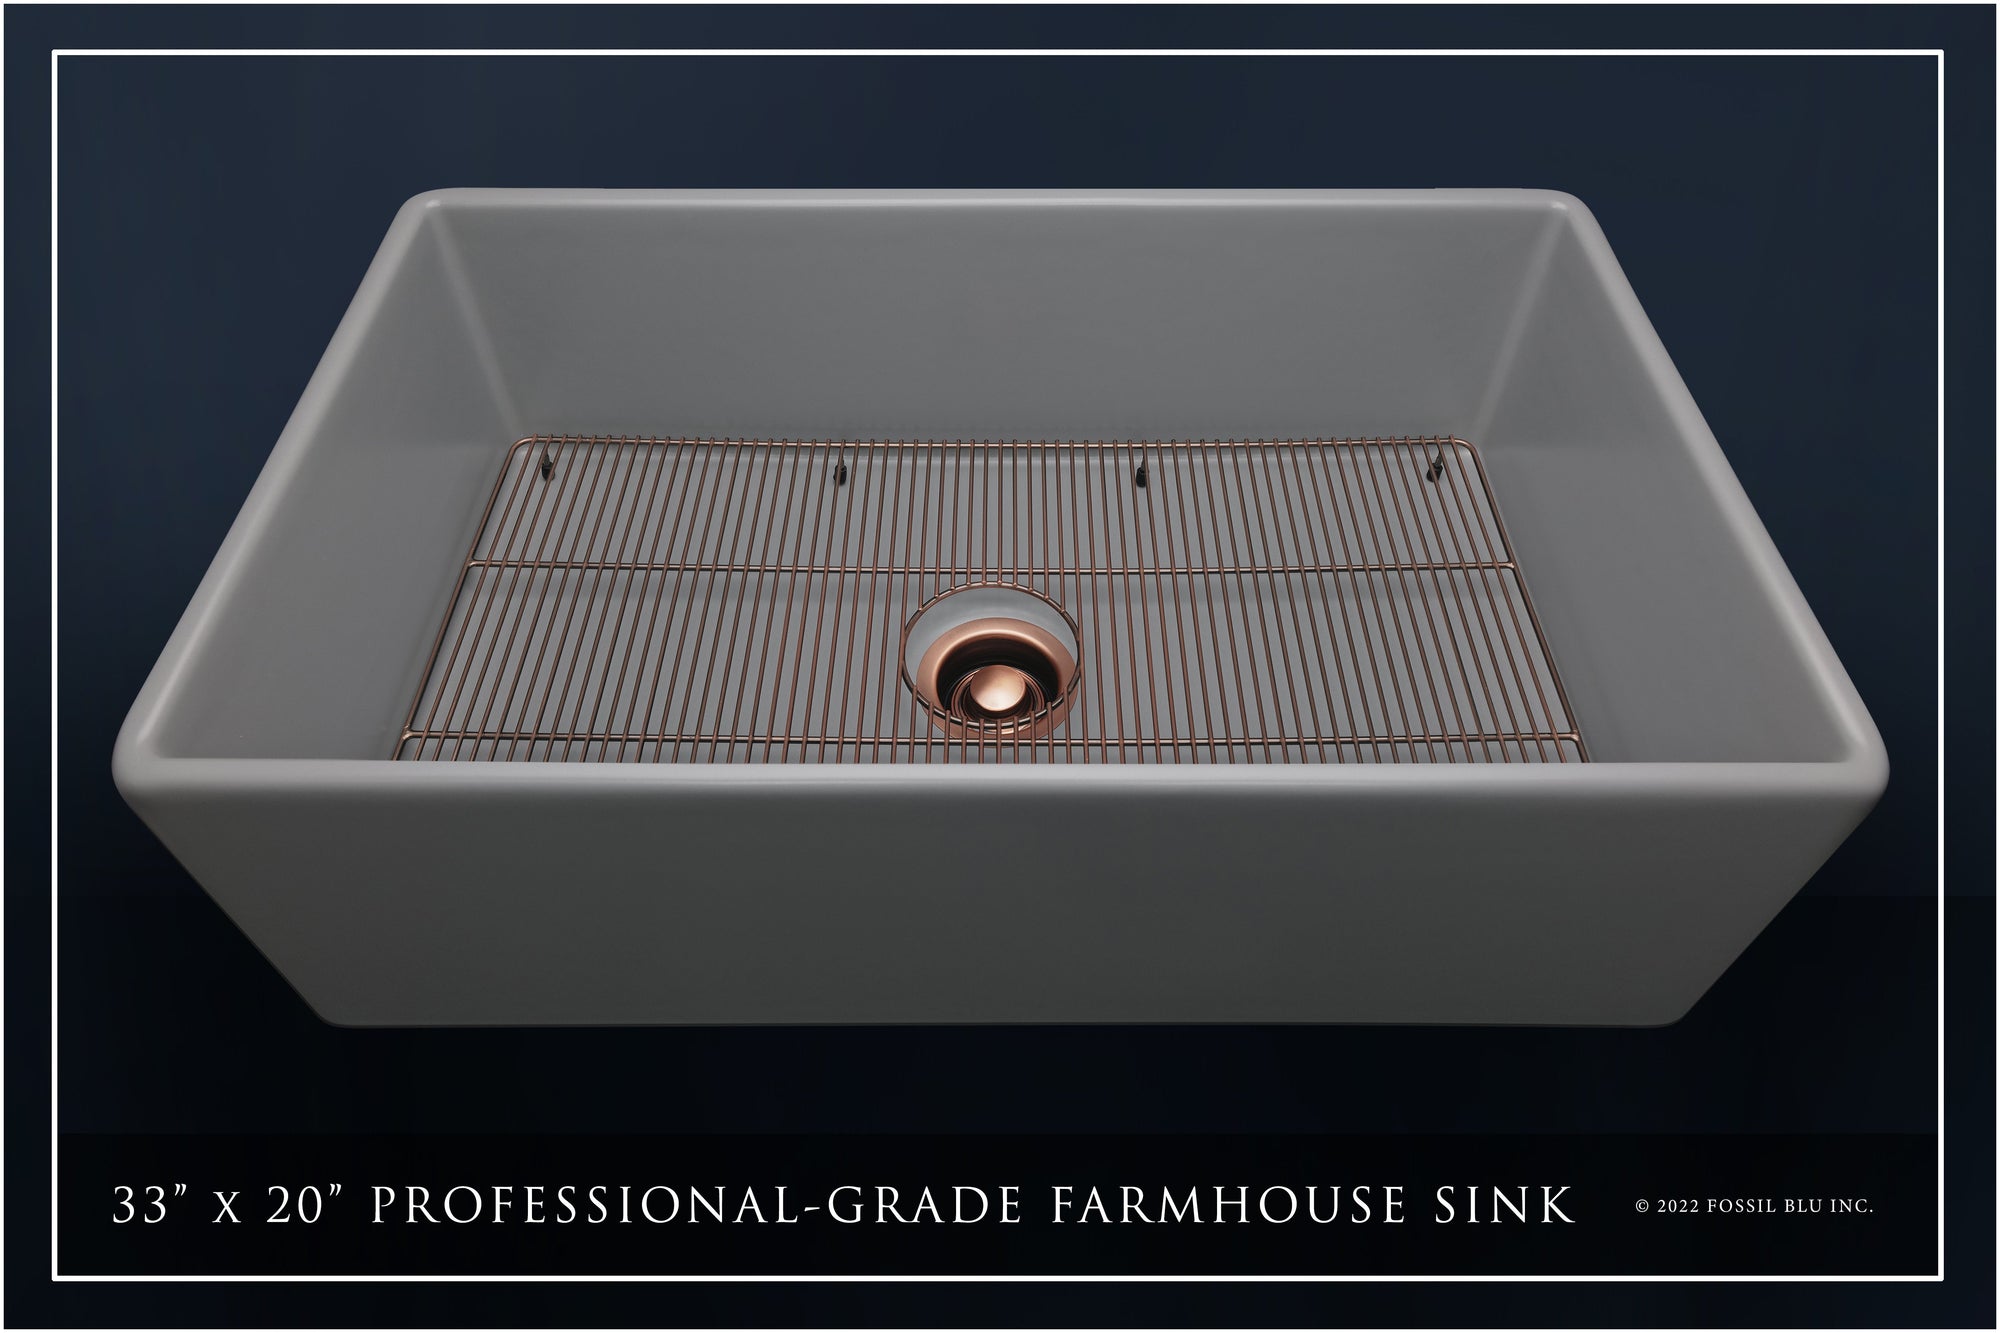 FSW1042AC LUXURY 33-INCH SOLID FIRECLAY FARMHOUSE SINK, MATTE GRAY, ANTIQUE COPPER ACCS, FLAT FRONT